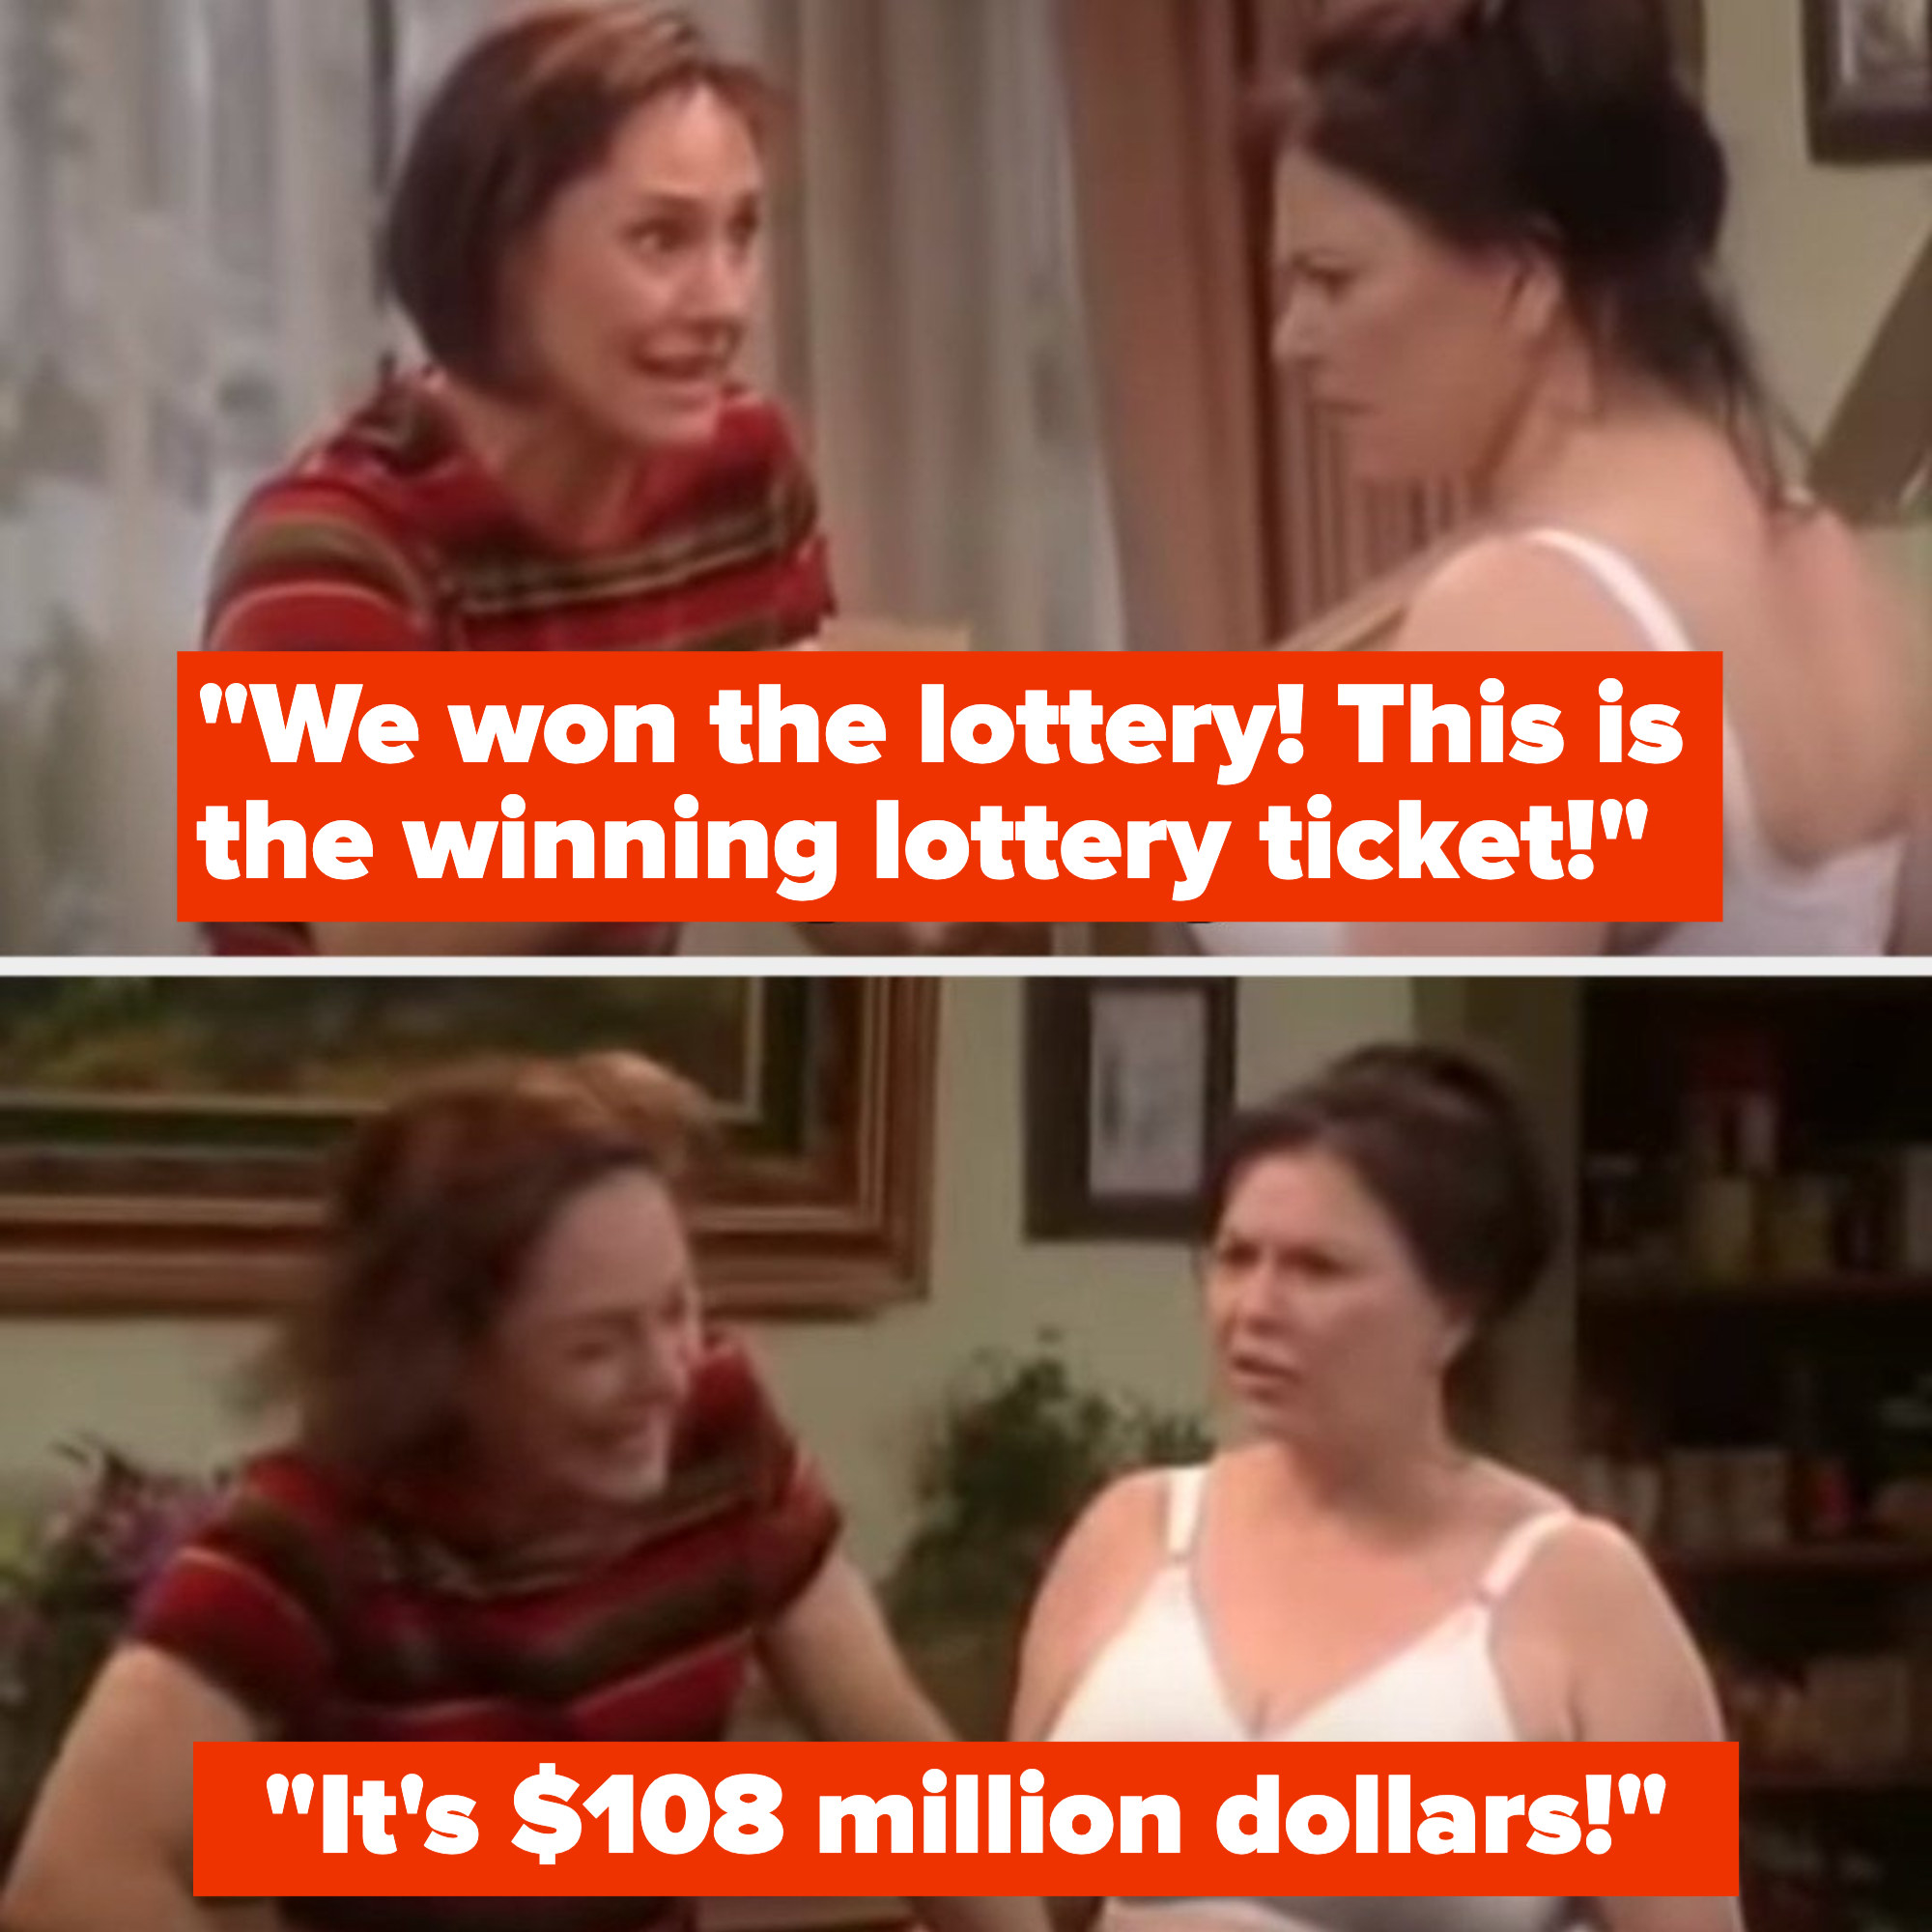 Jackie tells Roseanne that they won 108 million dollars in the lottery